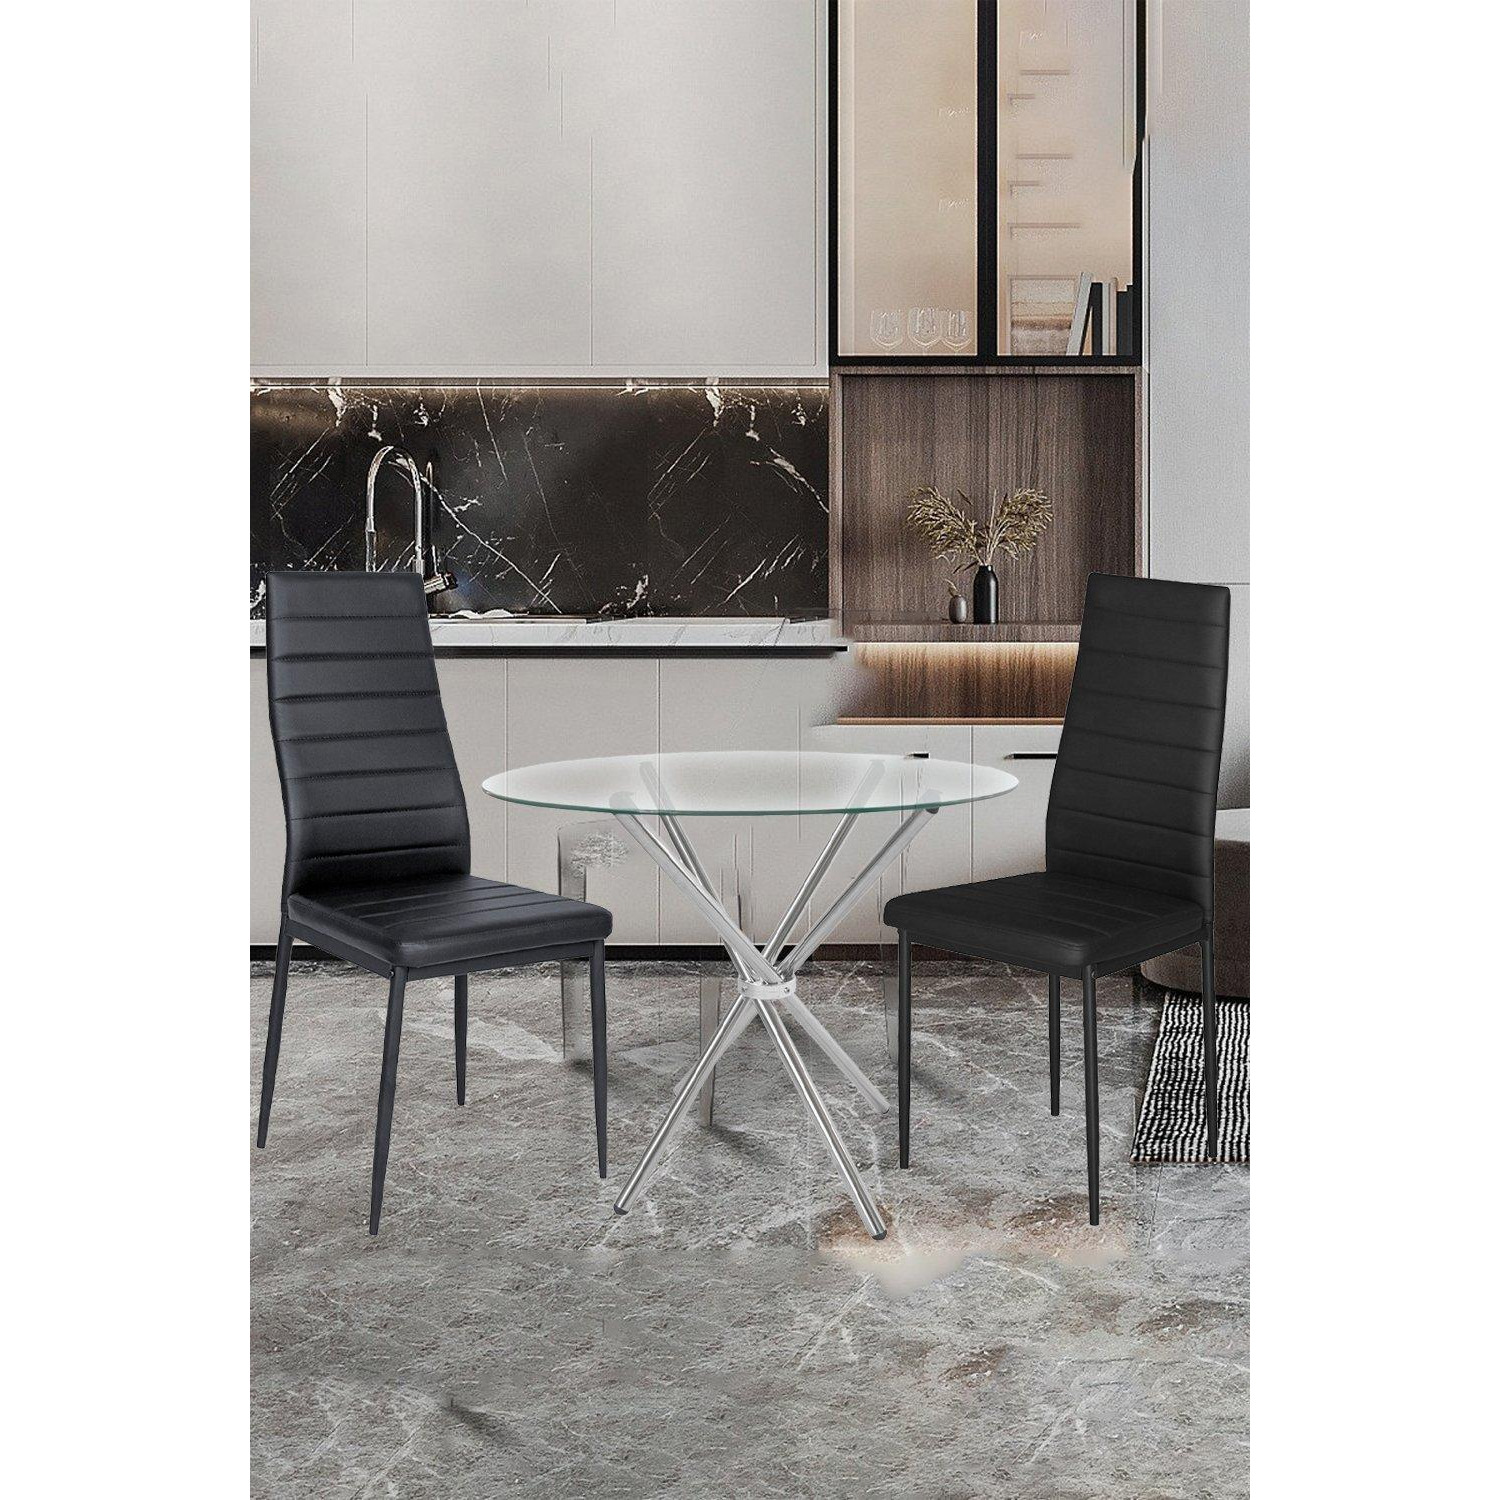 3-Piece Dining Table Set of Modern Faux Leather Dining Chairs and Tempered Glass Round Table - image 1